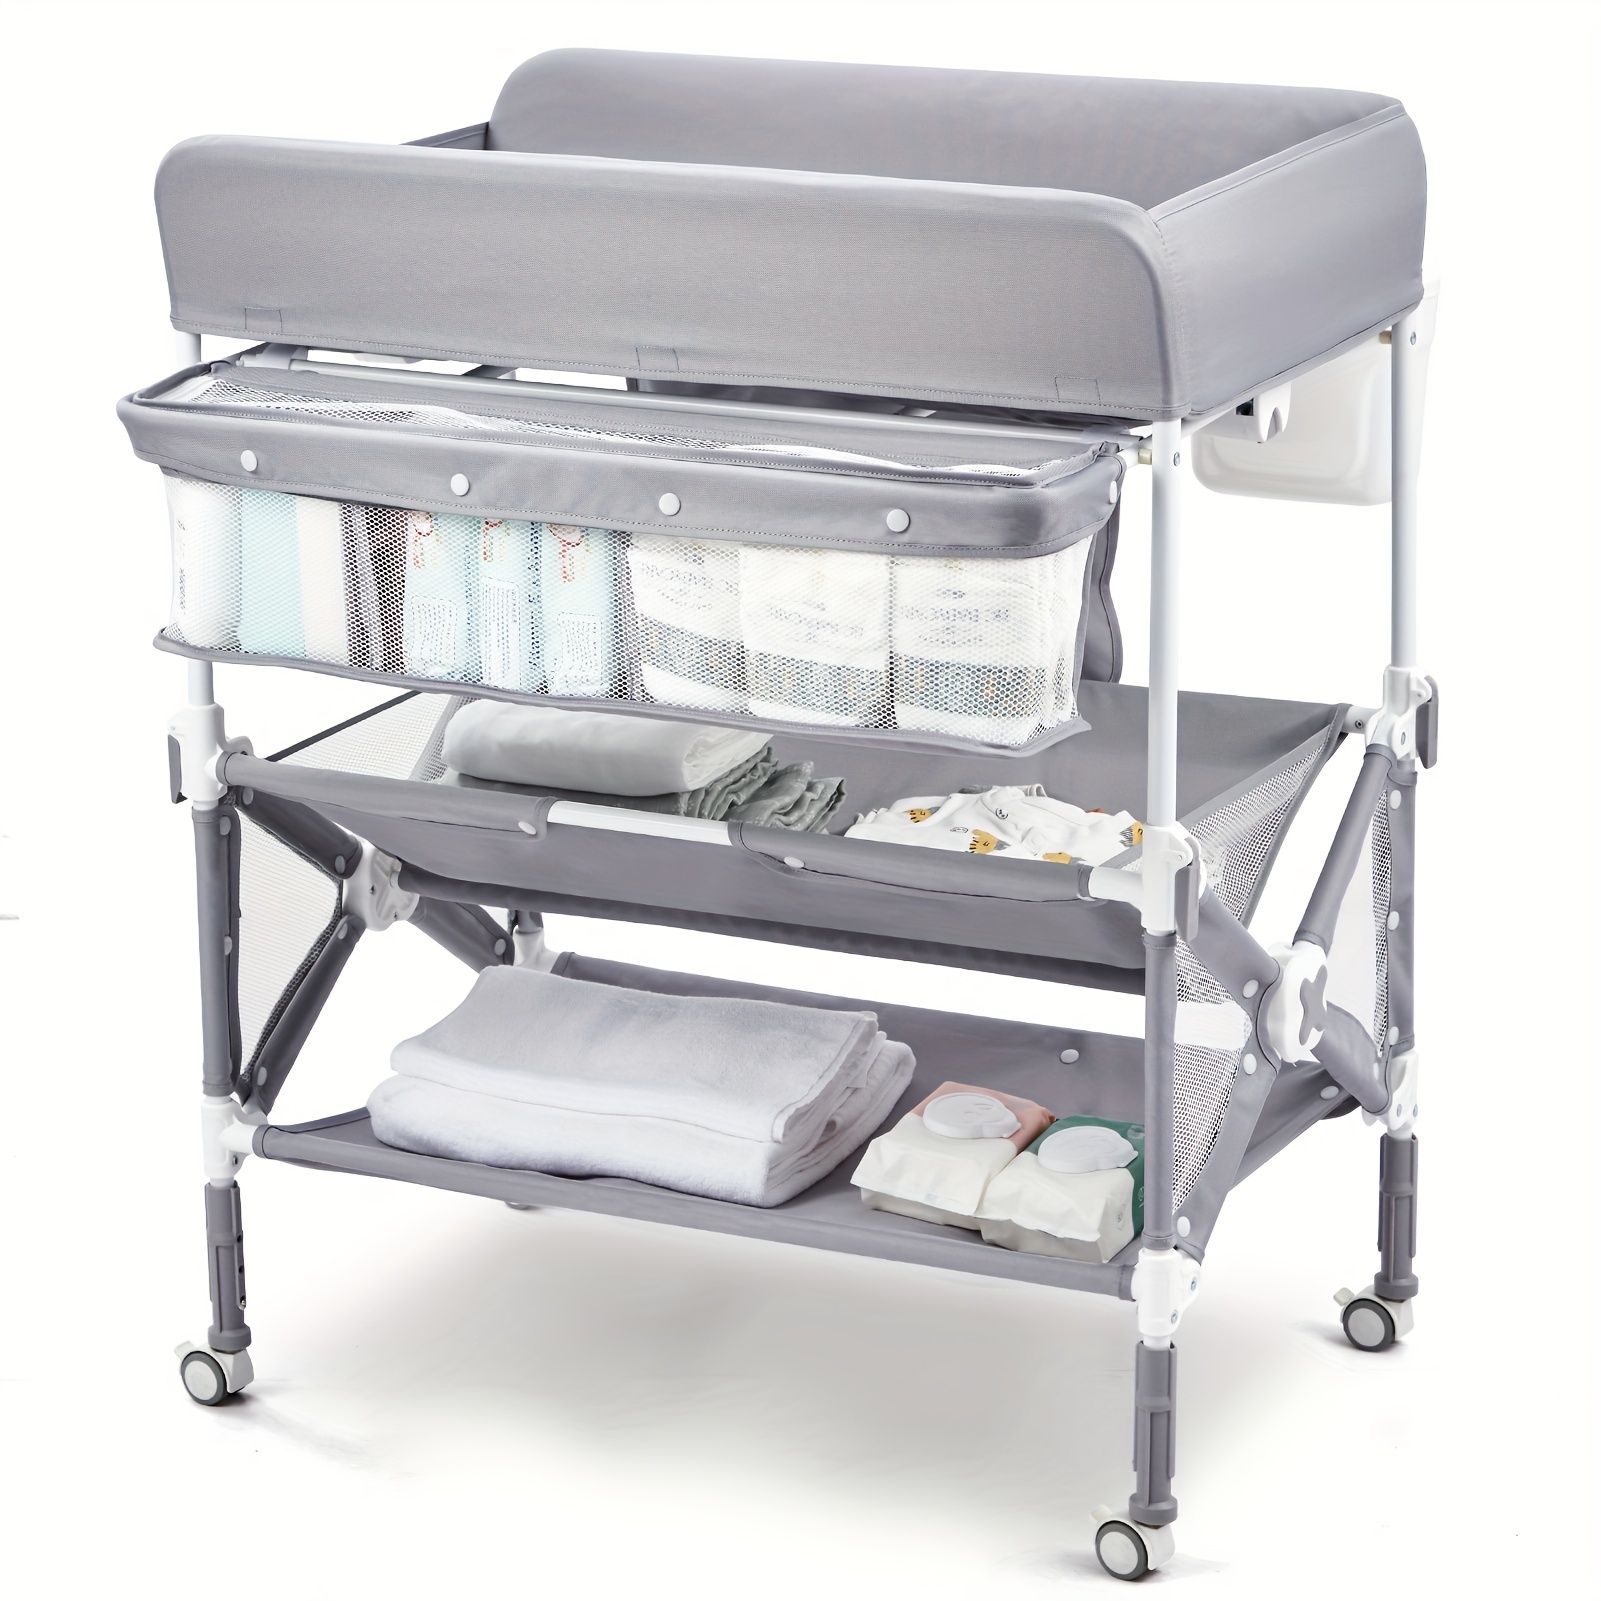 

Portable , Foldable Diaper Change Table With Wheels, Adjustable Height, Cleaning Bucket, Changing Station For Infant Mobile Nursery Organizer For Newborn (grey)